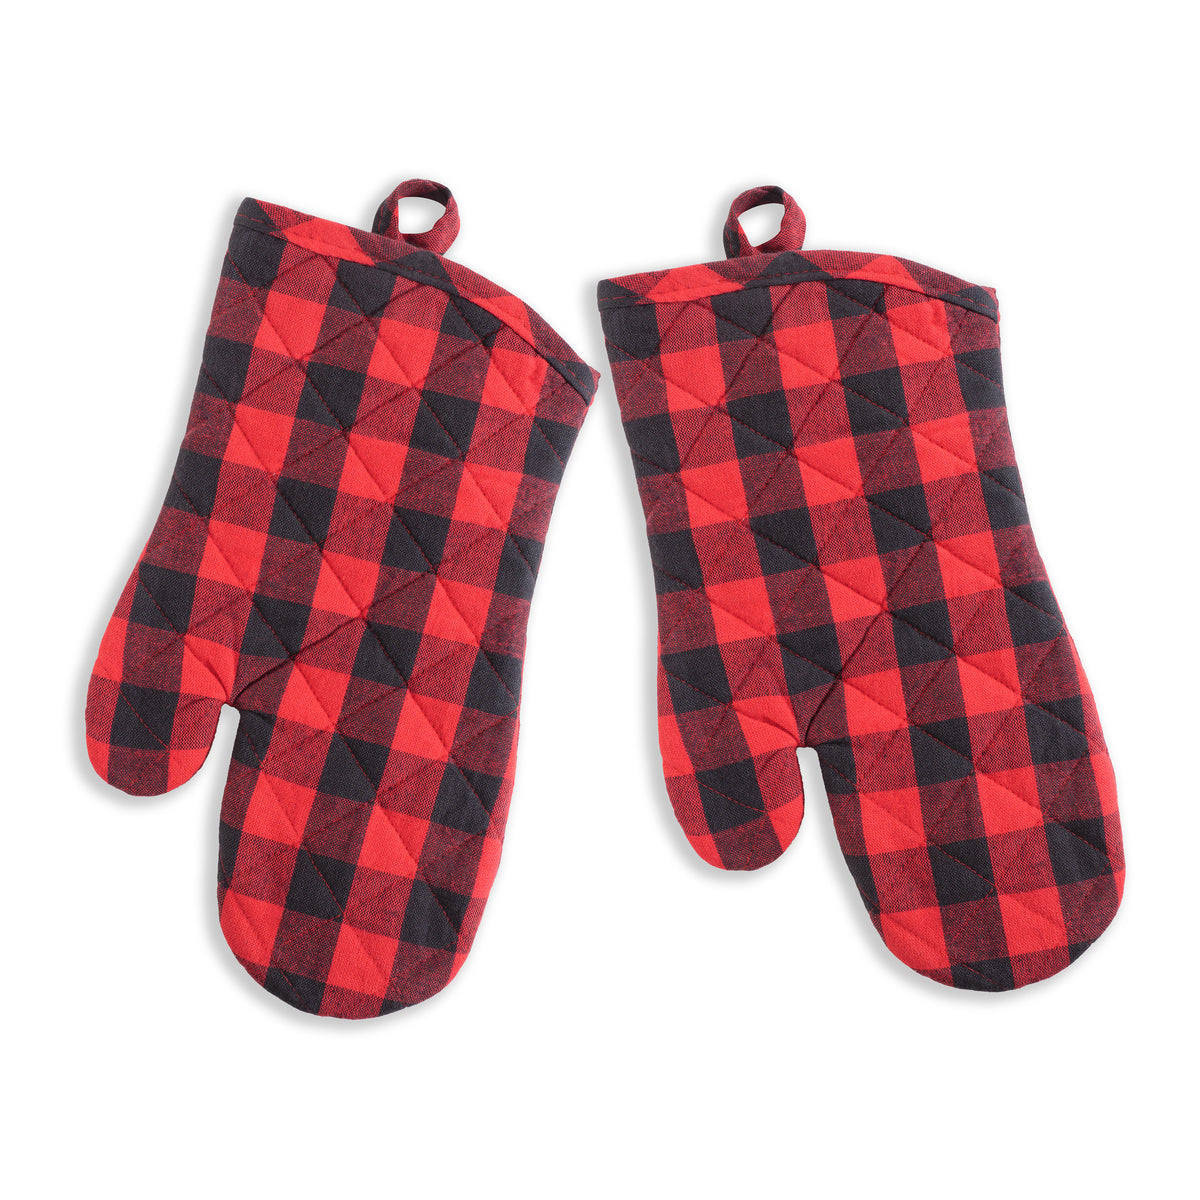 Lodge Oven Mitts